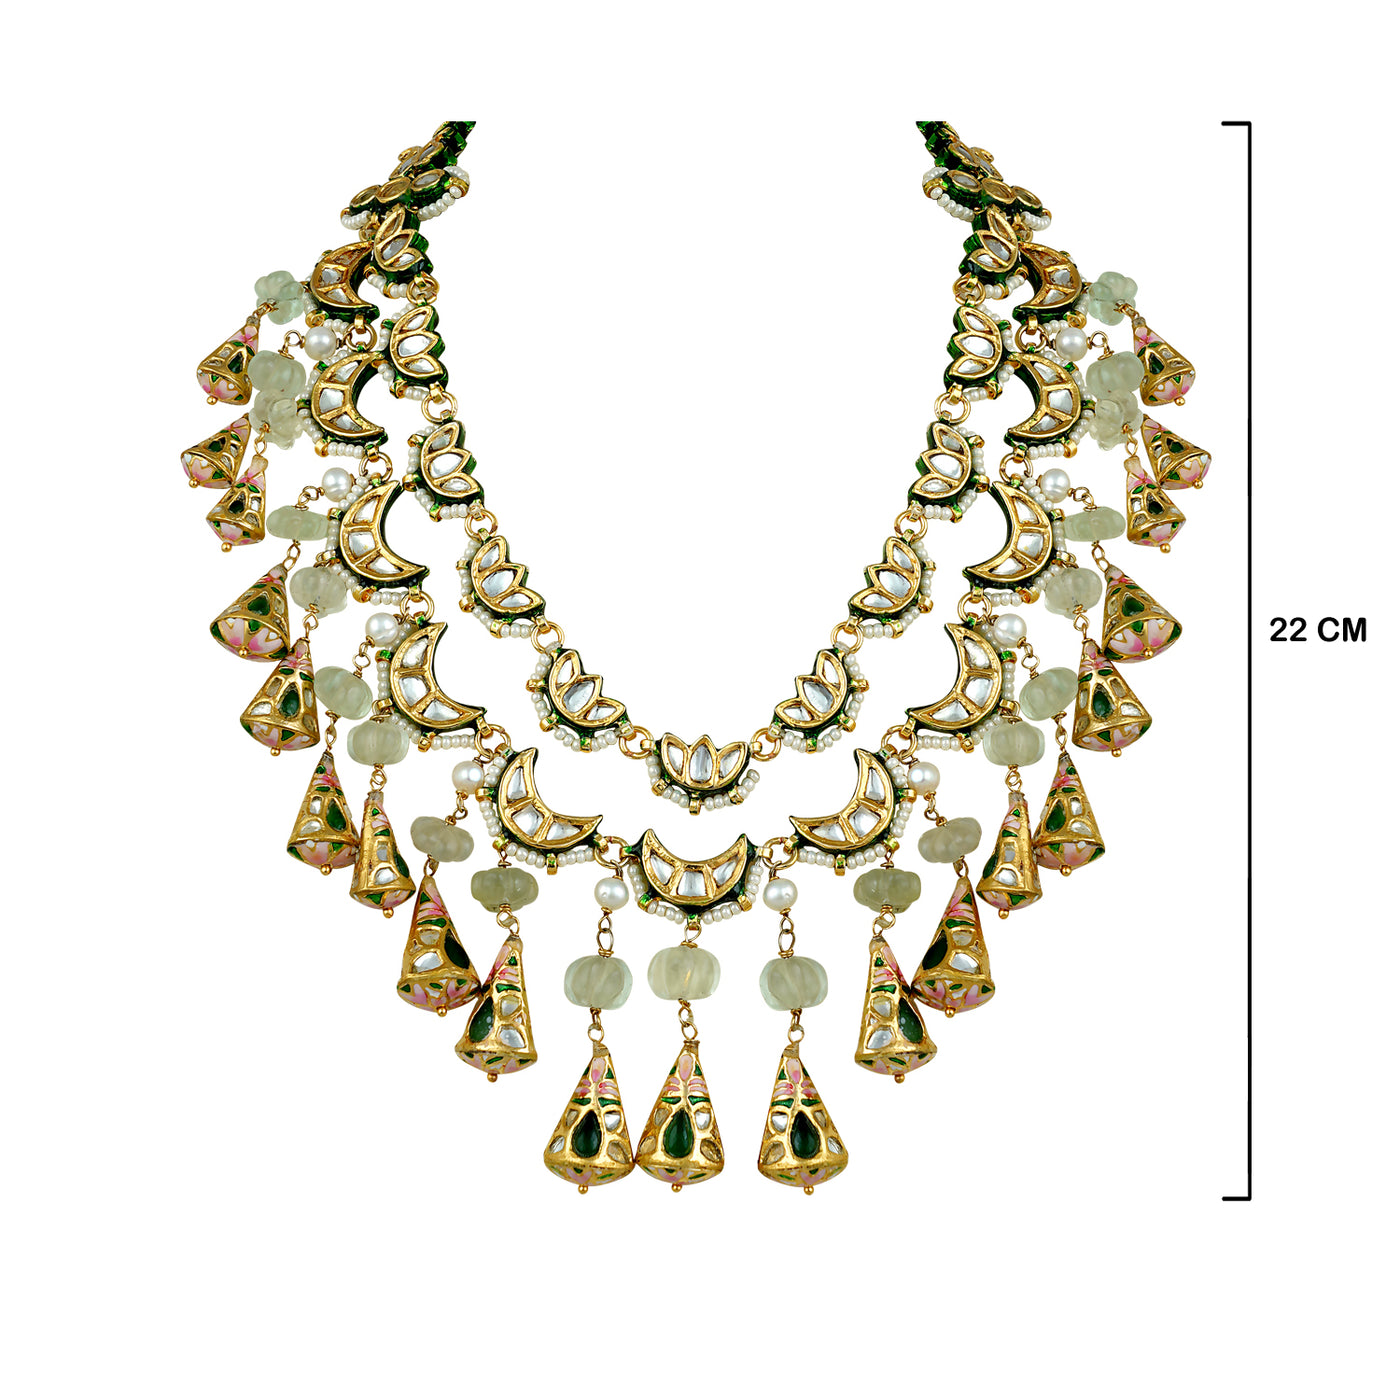 Reversible Double Strand Kundan Necklace with Measurements in cm